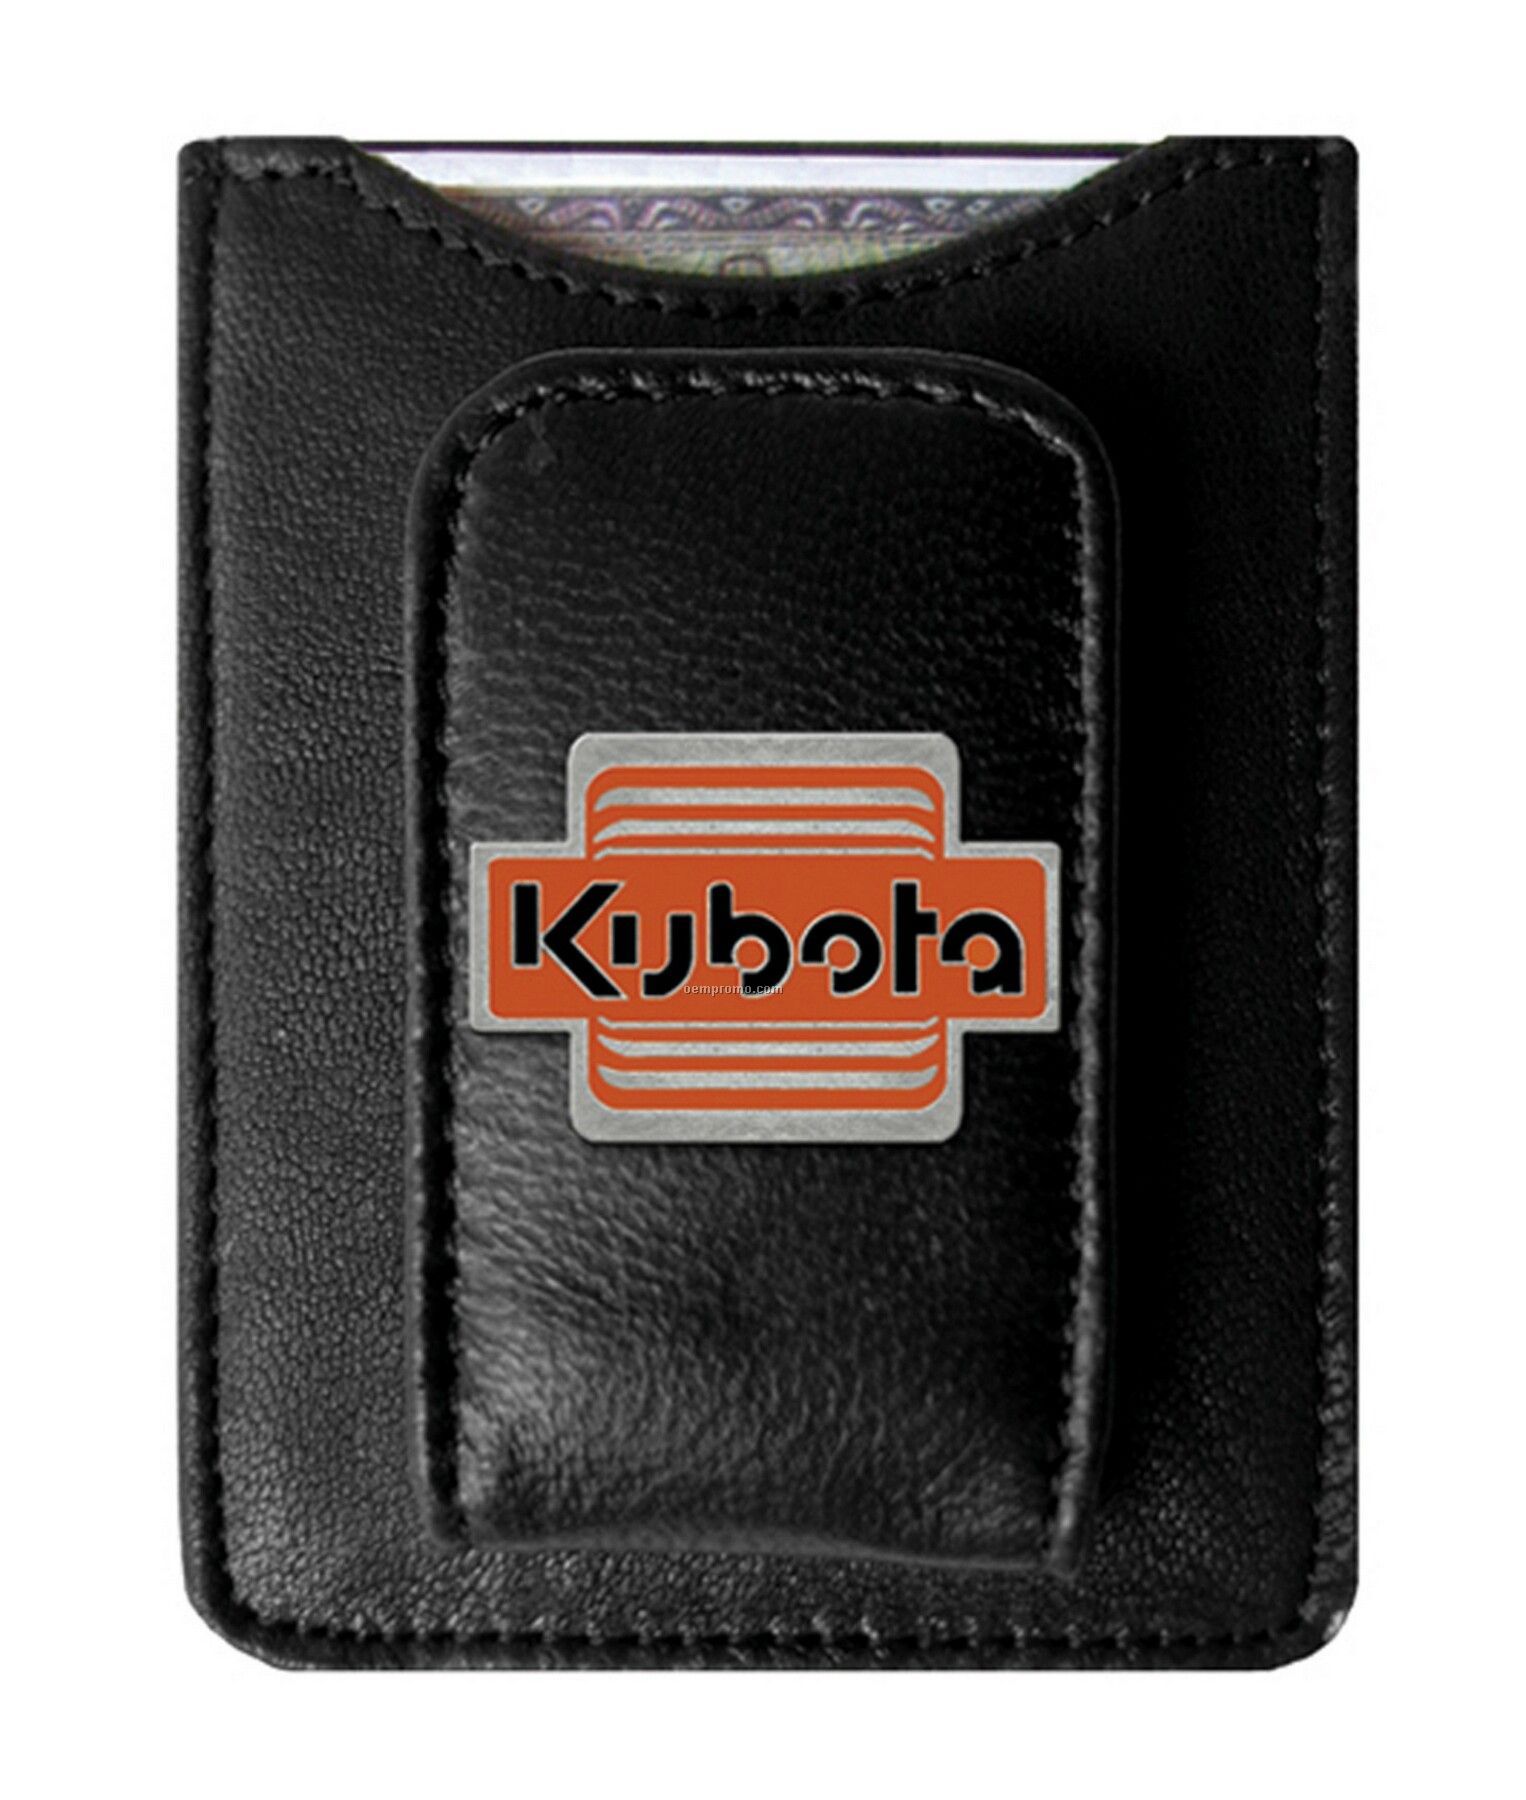 Credit Card Holder / Money Clip With 1